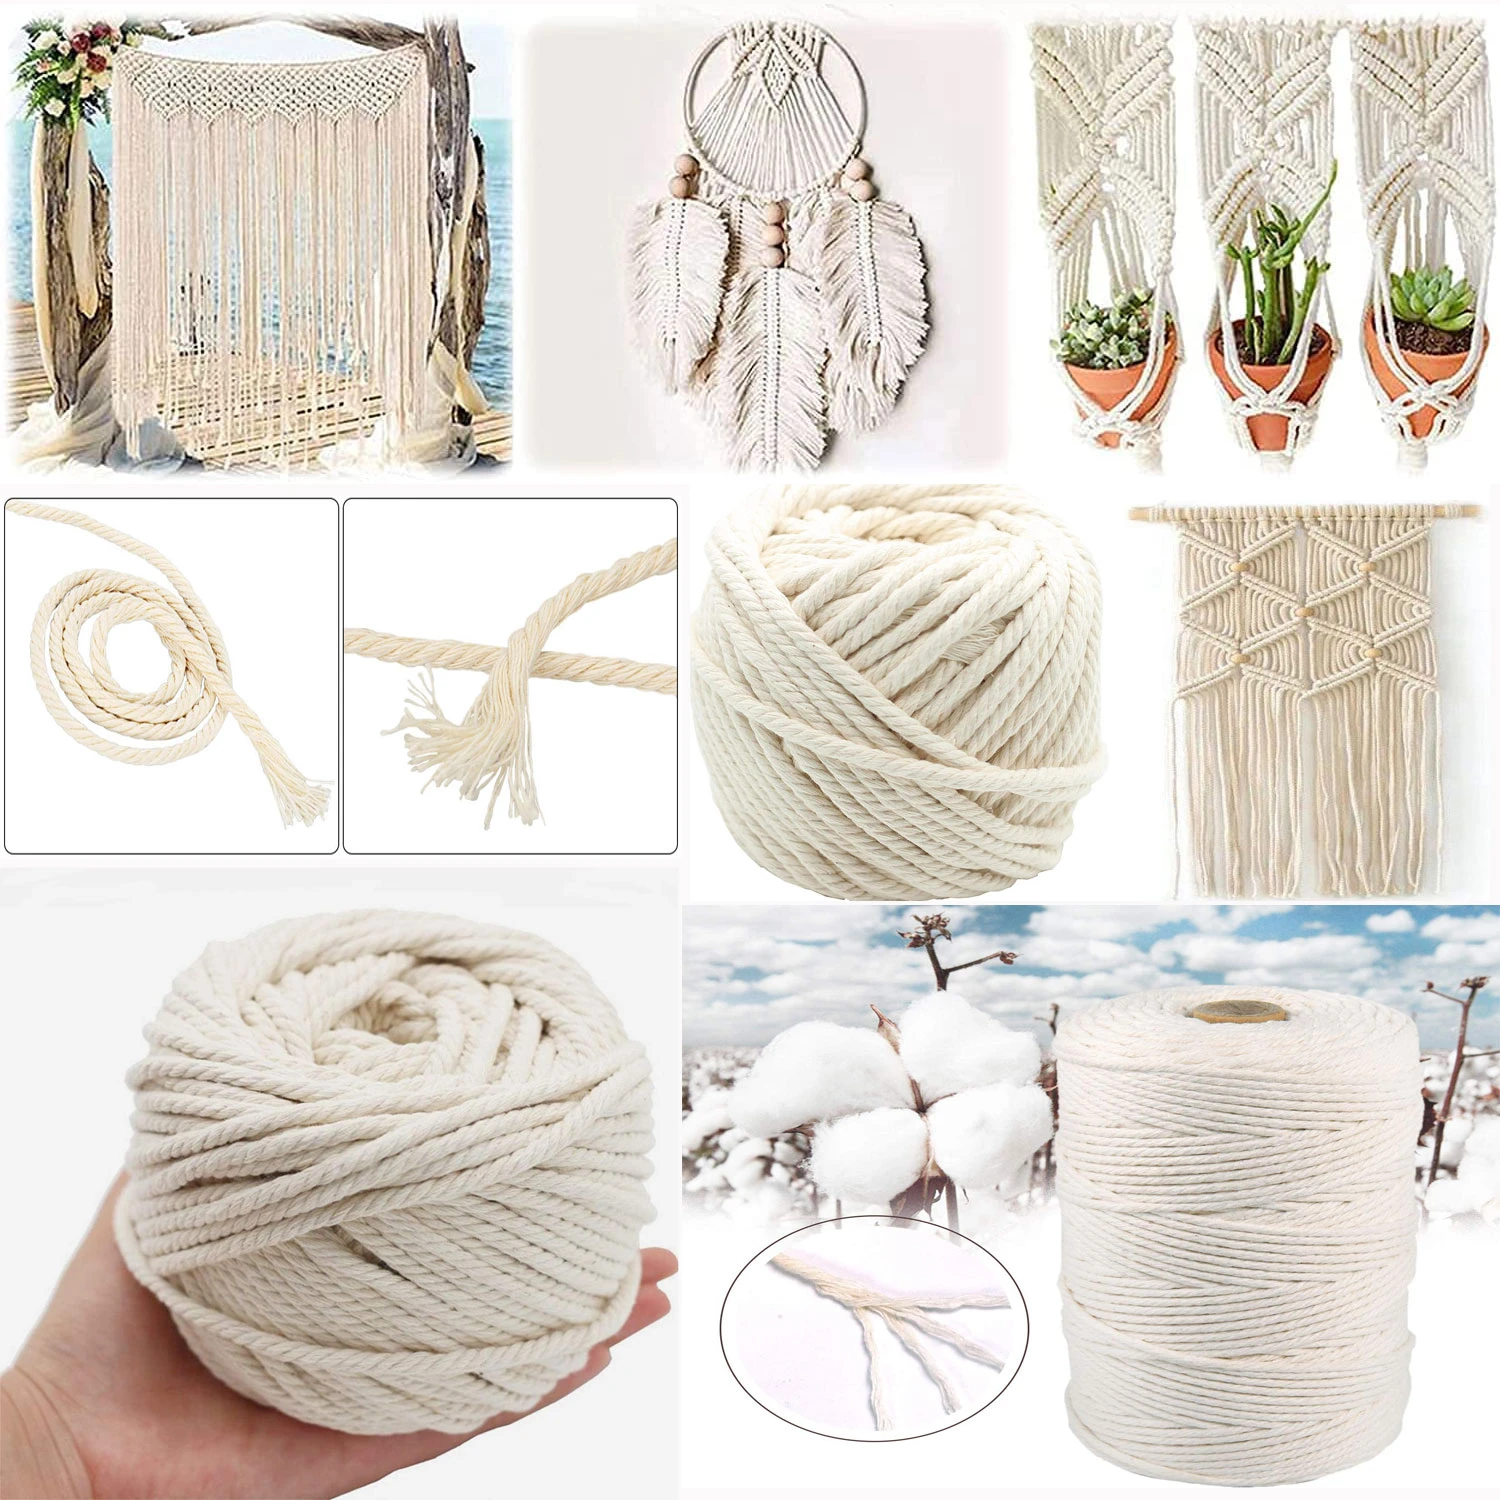 2-100M Macrame Cotton Cord Thread Rope Craft for Wall Handmade  Natural Cotton Twisted Rope Handmade Decorative DIY Home Crafts Adhesive Fastener Tape